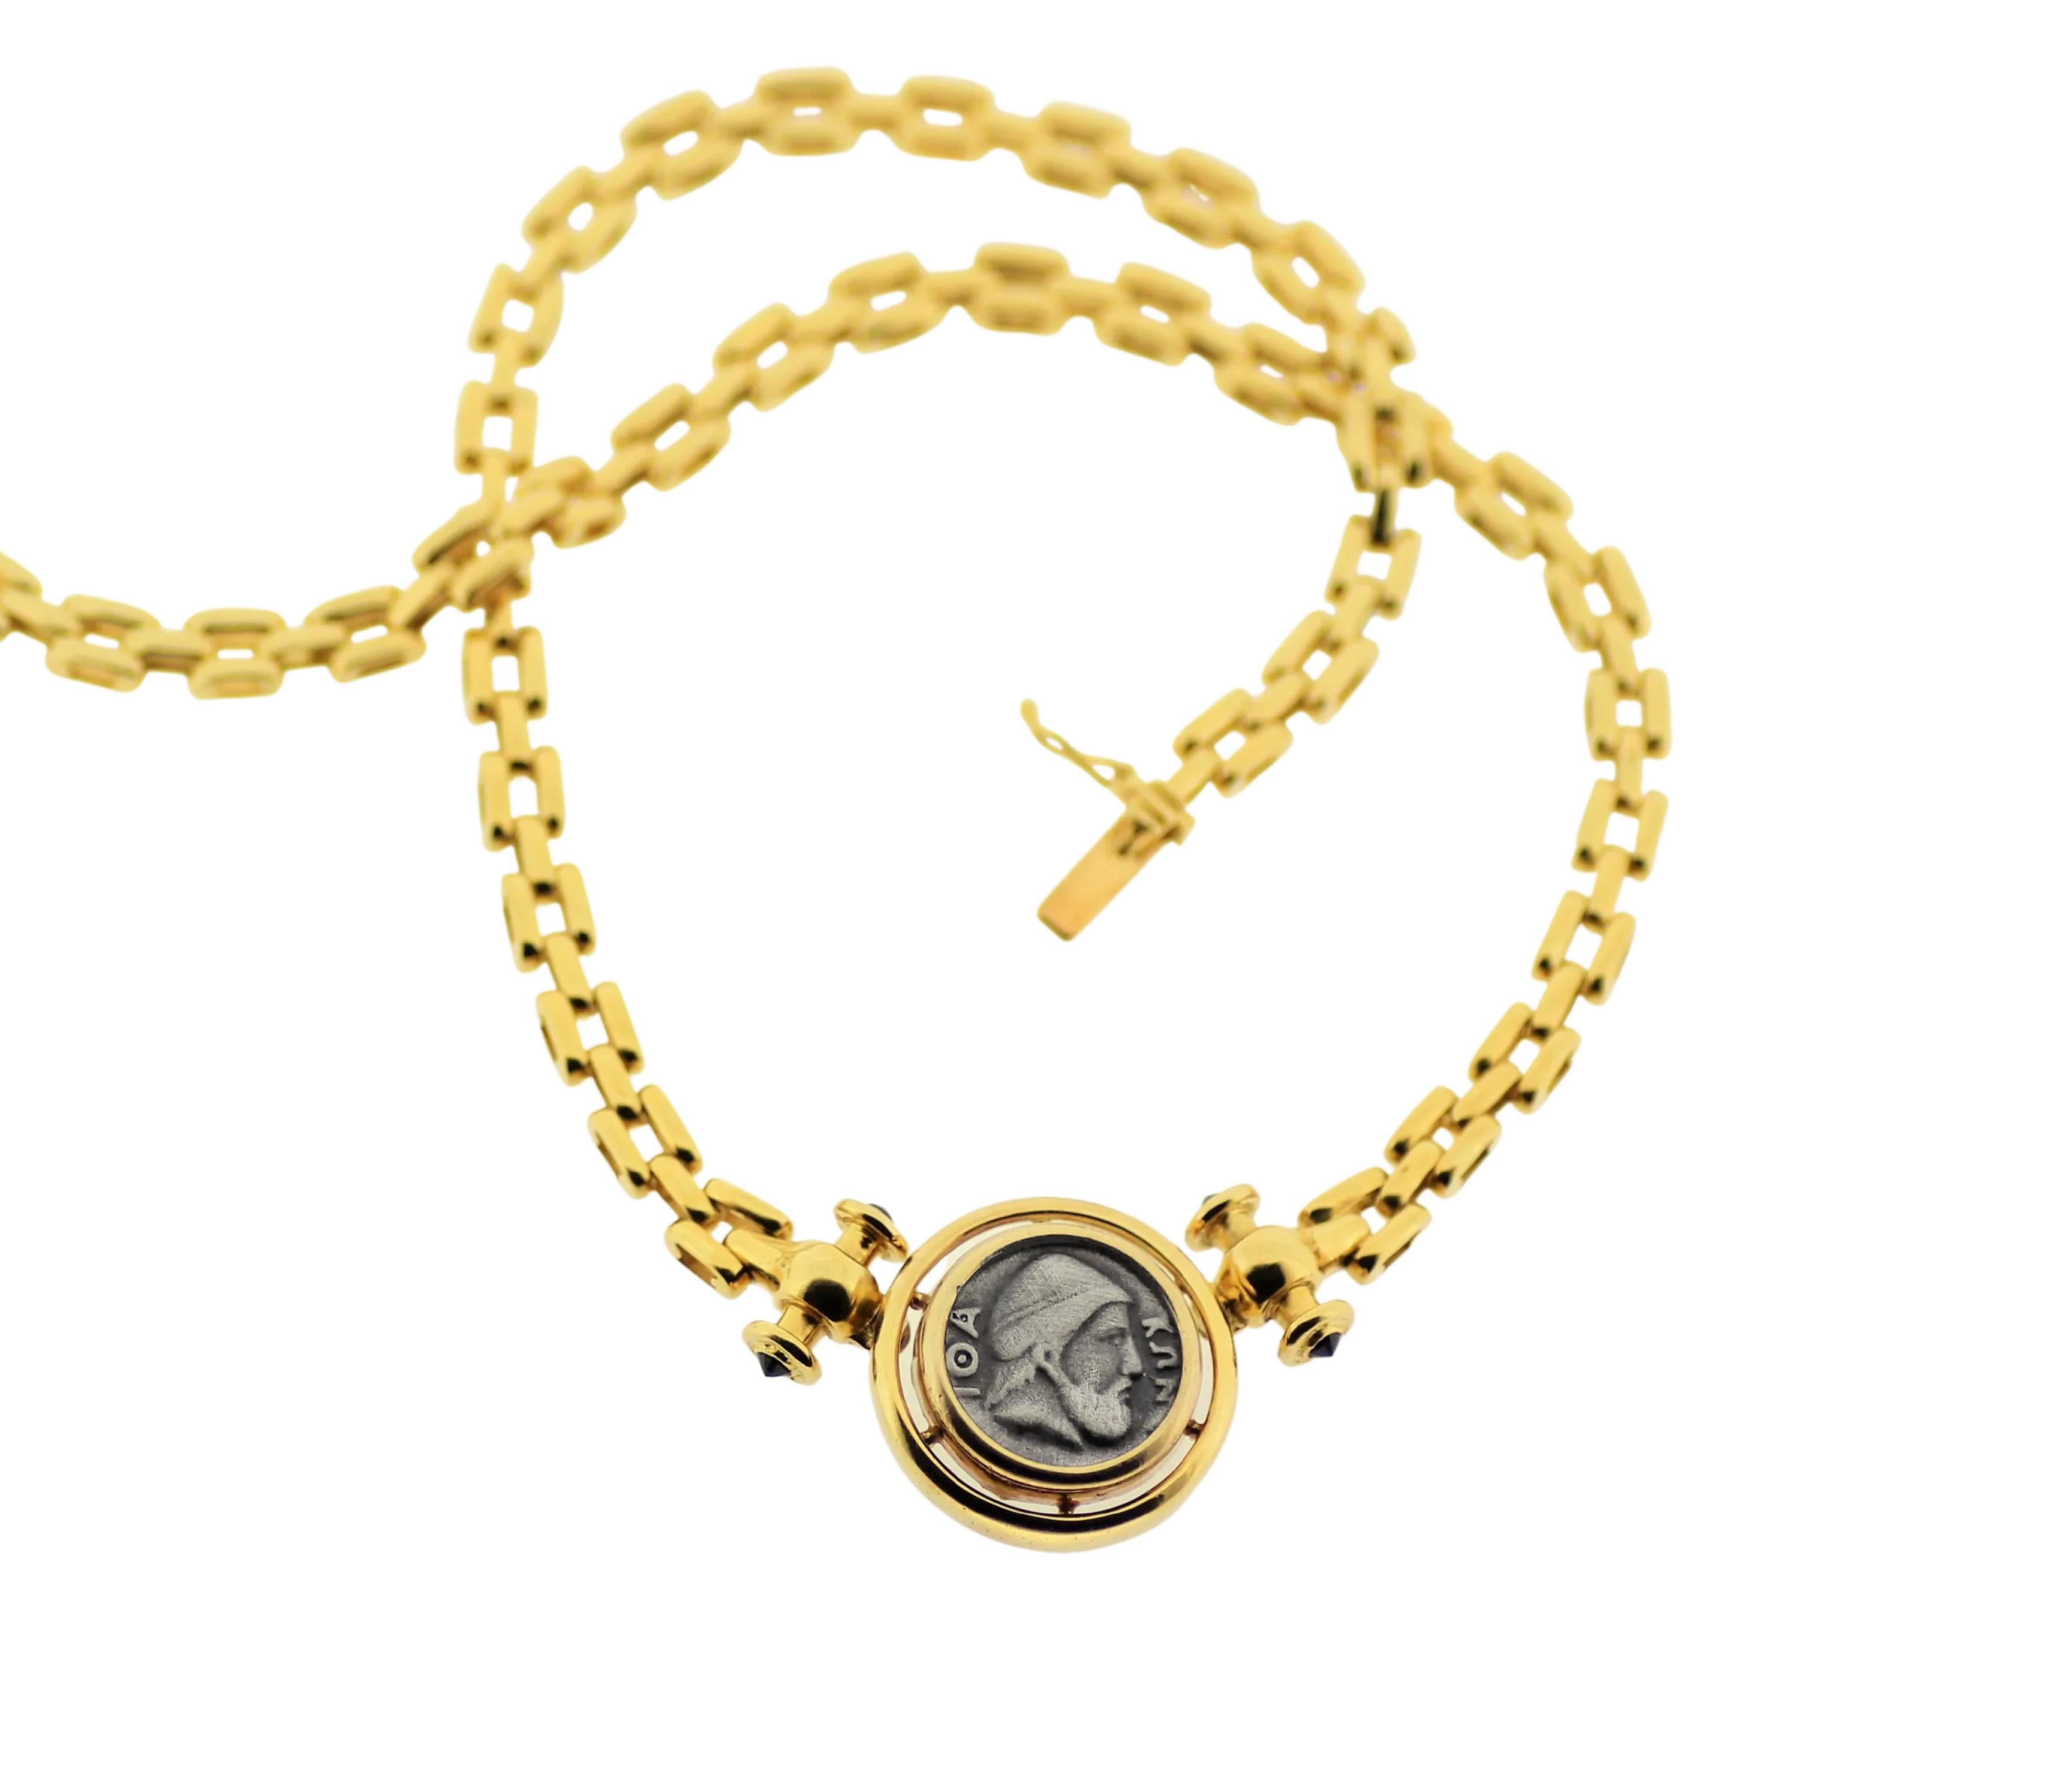 Odysseus Coin Grecian style Chain Necklace in 18Kt Yellow Gold and Oxidized Silver with king of Ithaca Odysseus in the center.
A one-of-a-kind classic necklace timeless ,authentic a family treasure!
Coin front: - Probably the head of King Odysseus